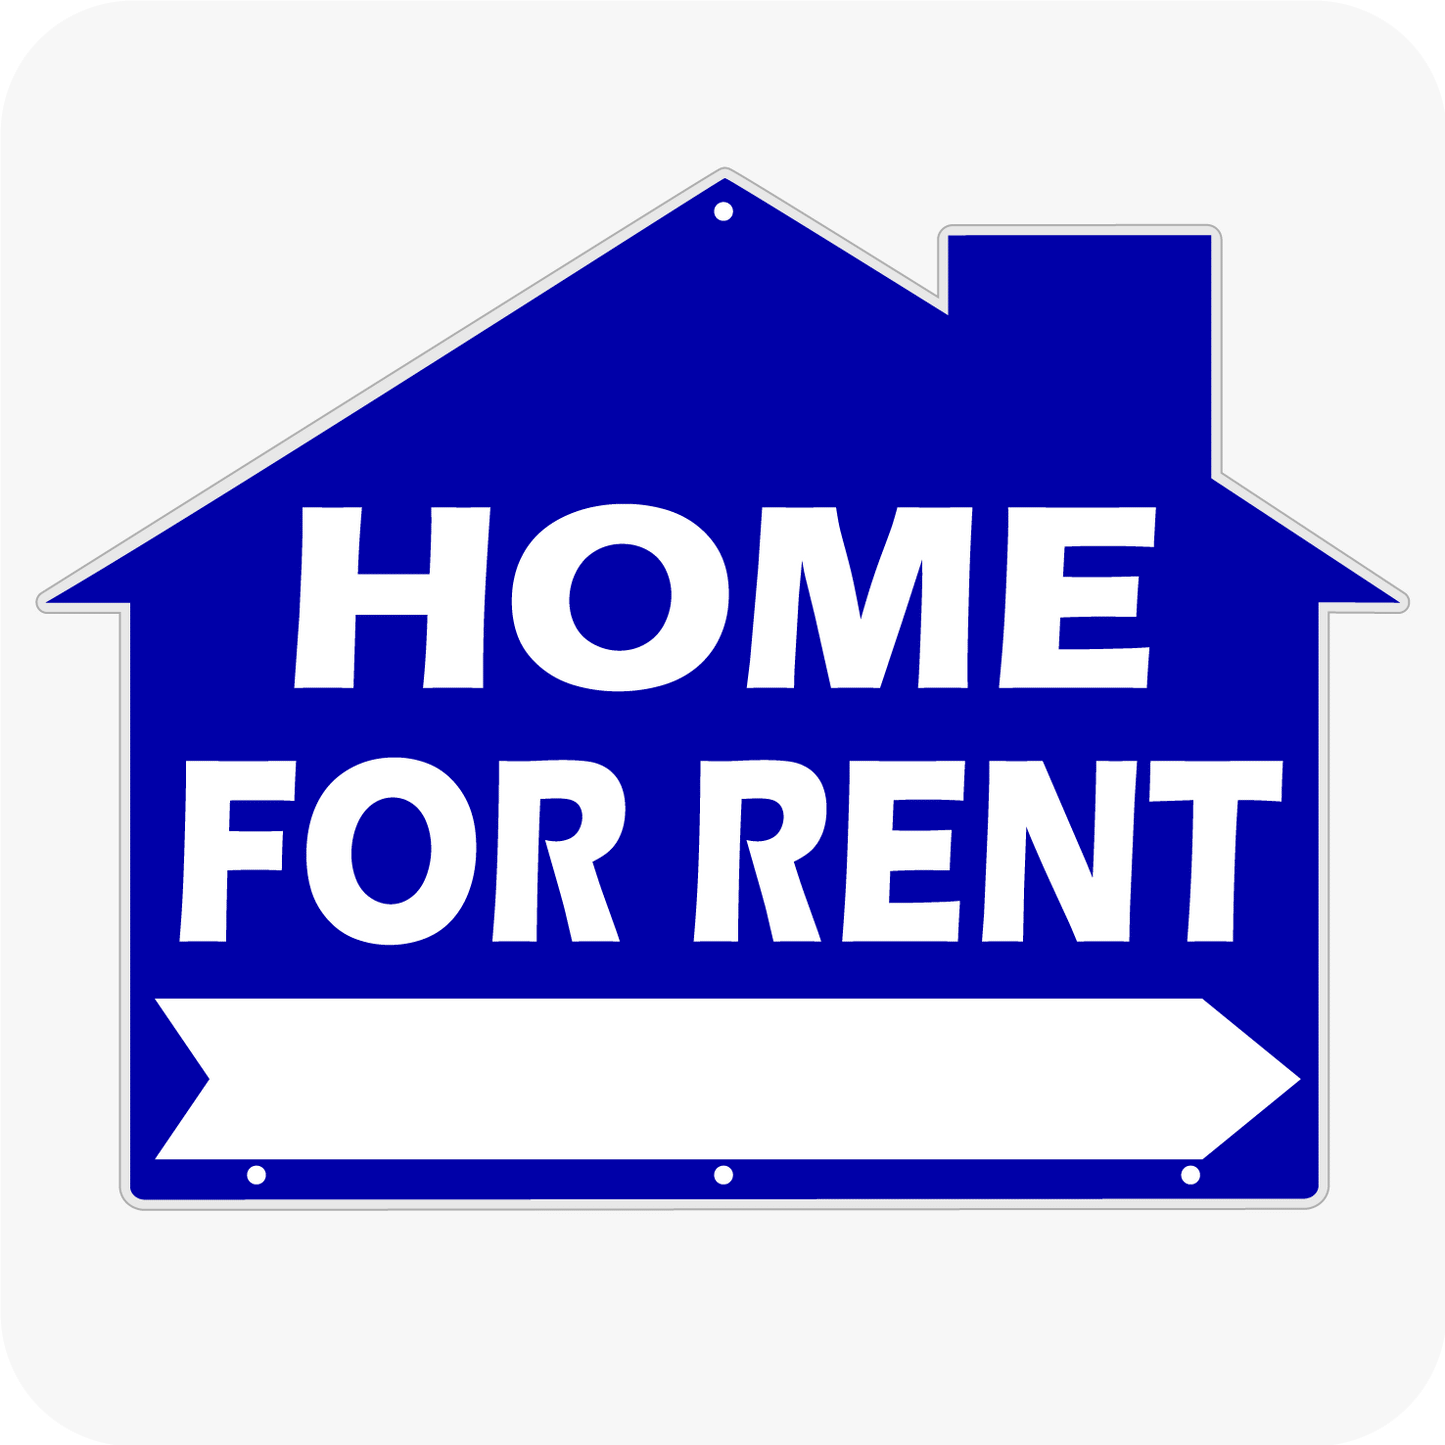 Home For Rent - House Shaped Sign 18x24 - Blue